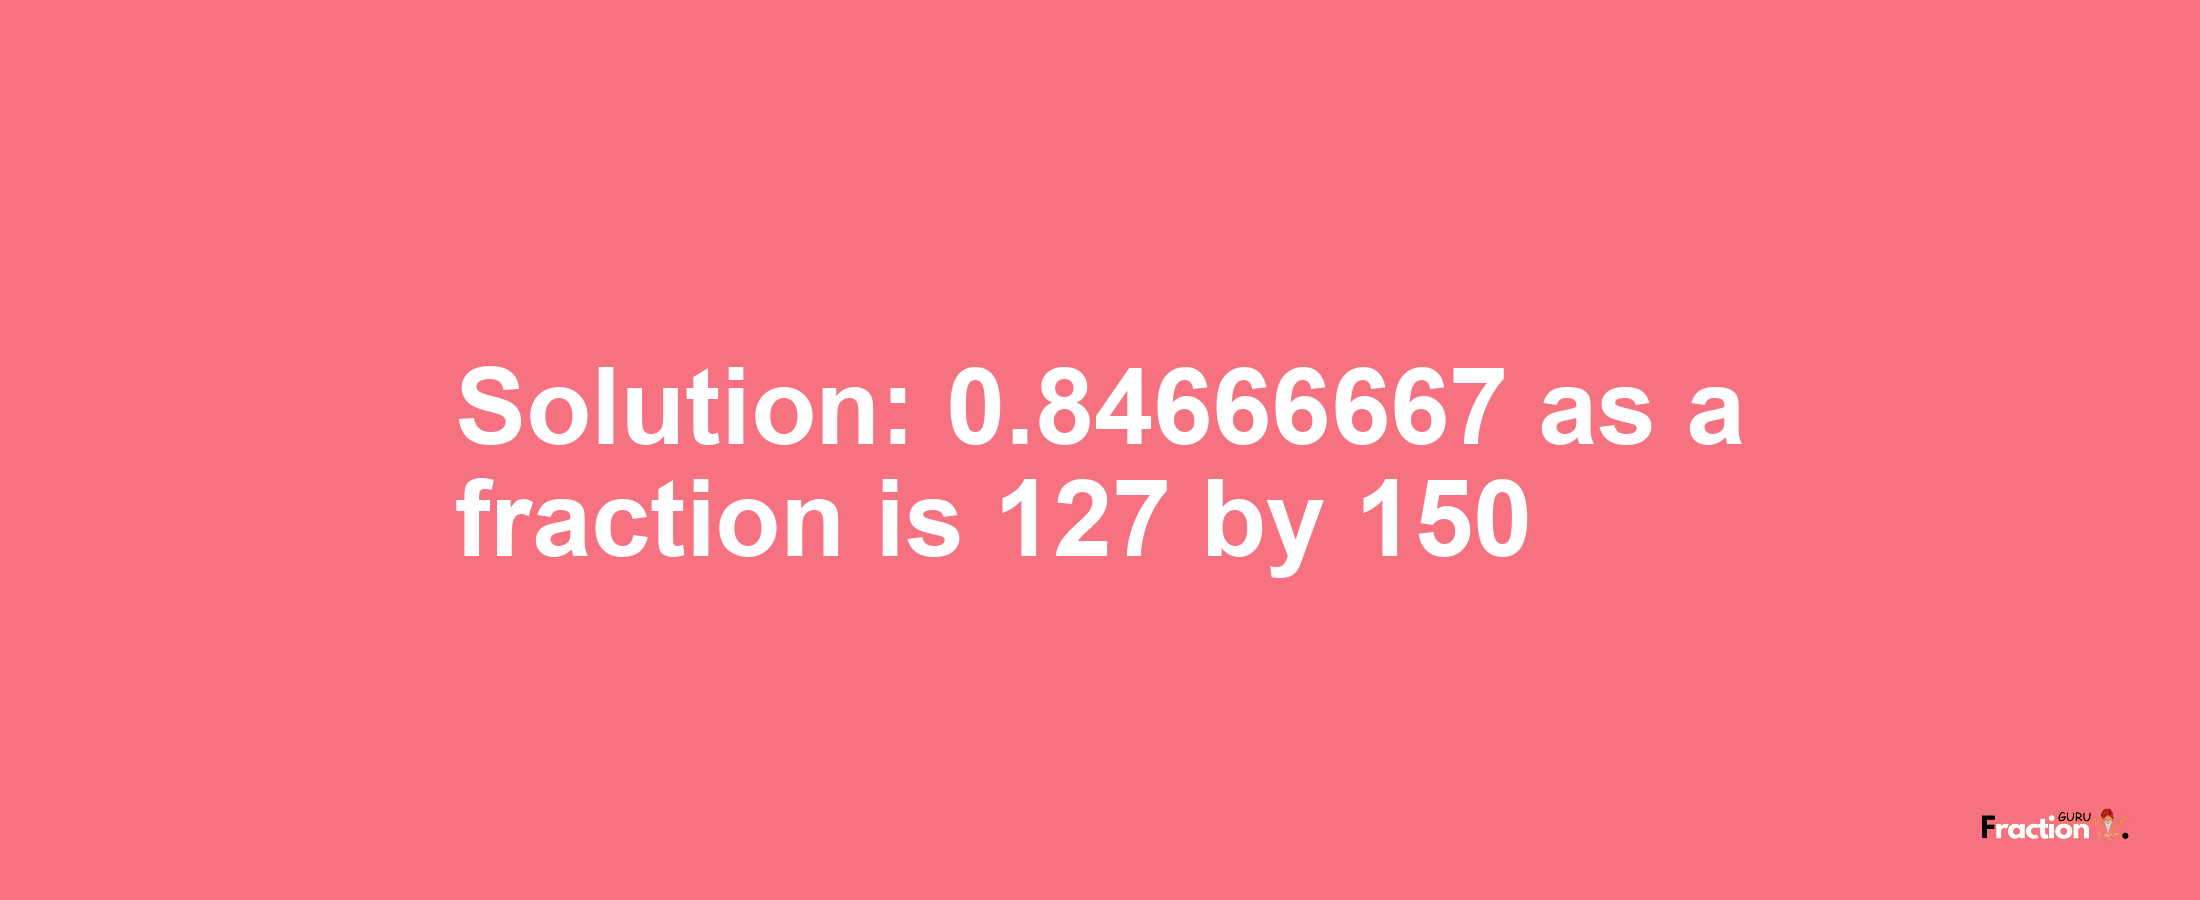 Solution:0.84666667 as a fraction is 127/150